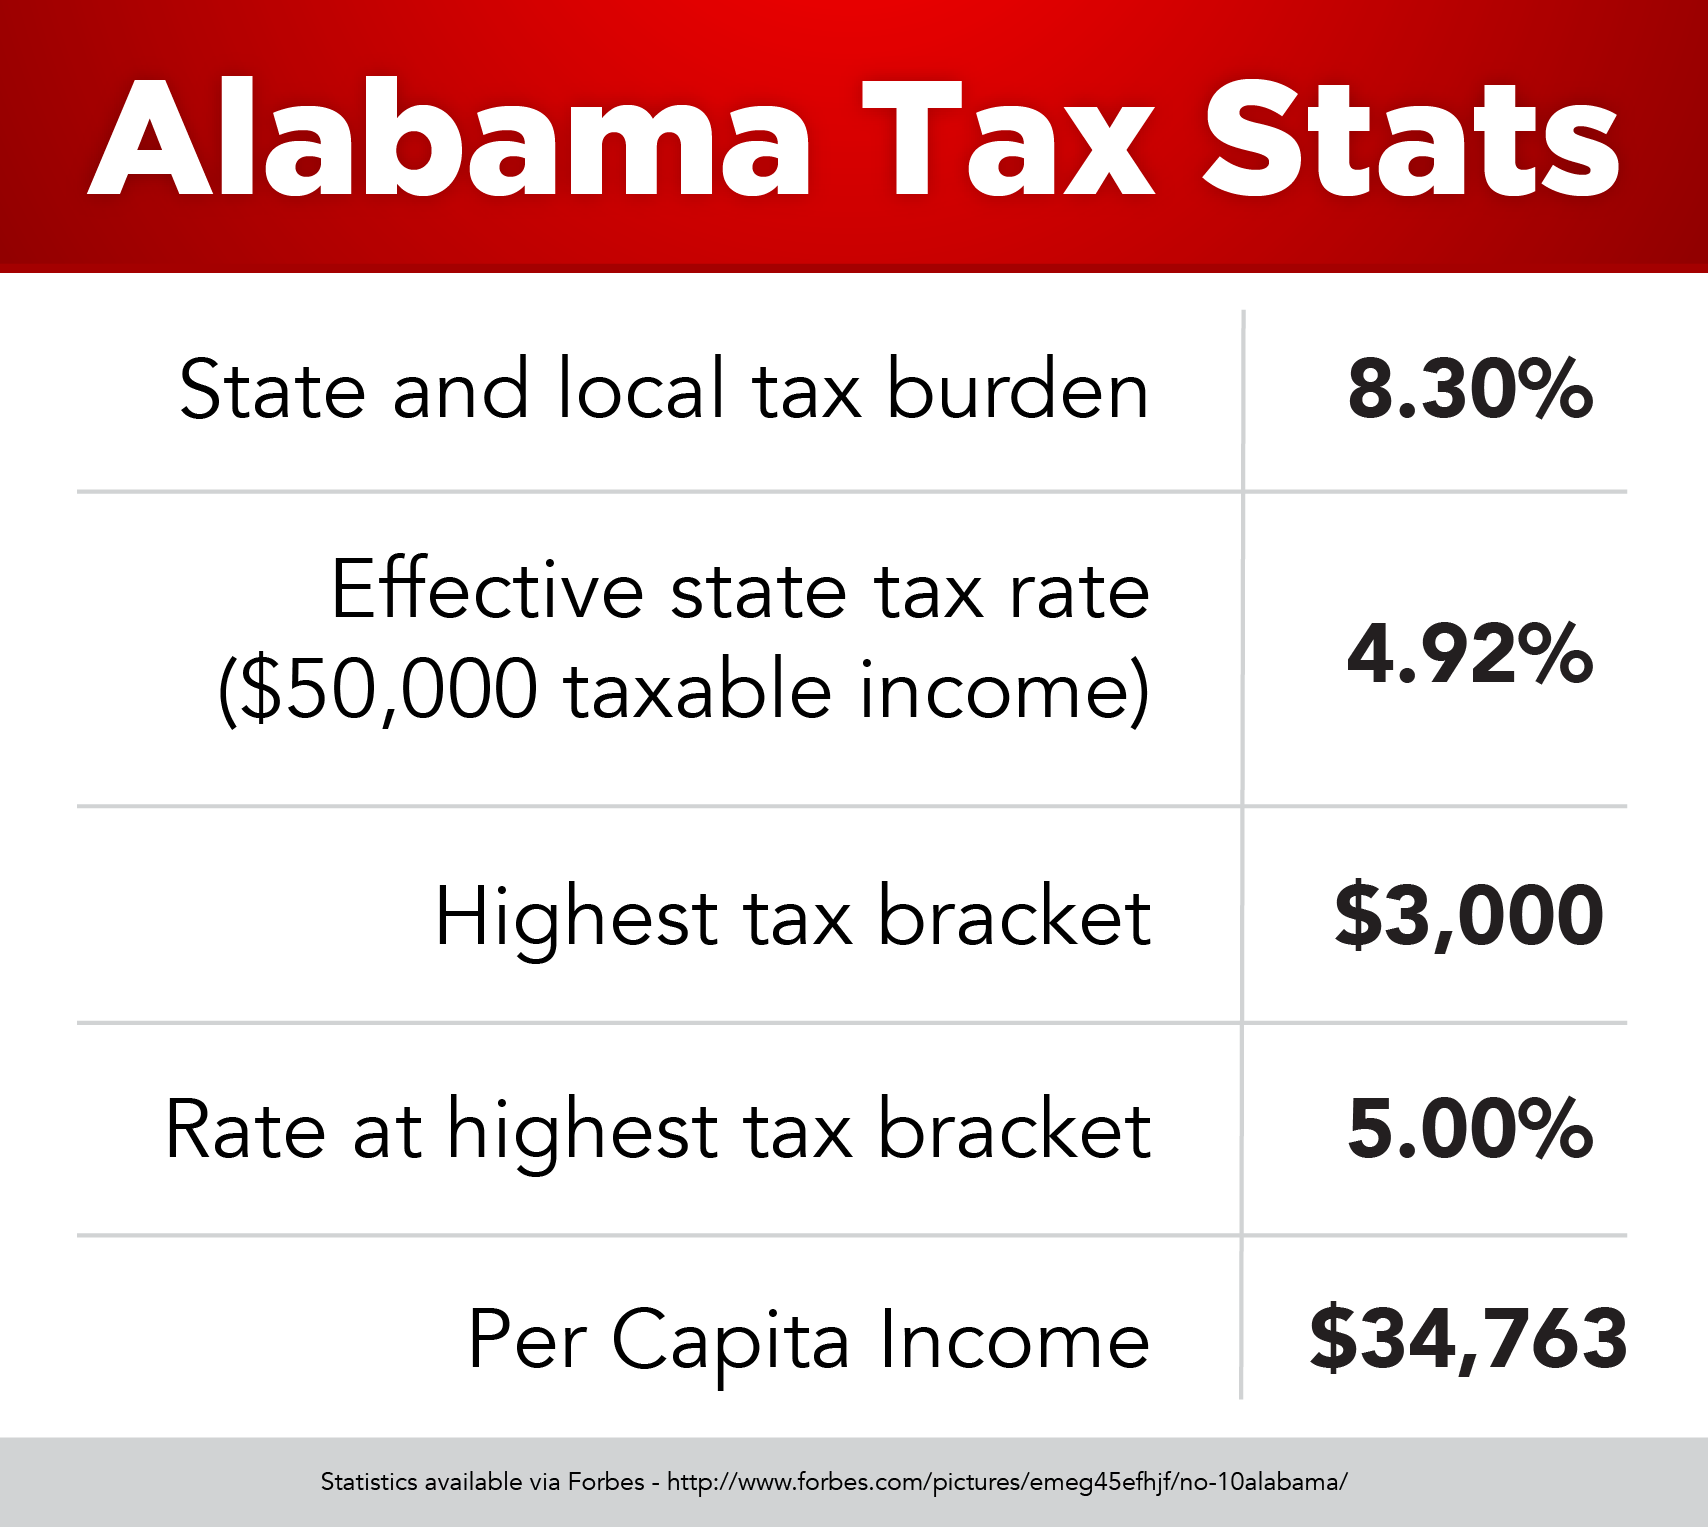 happy-tax-day-forbes-says-alabama-is-the-10th-best-state-for-taxes-yellowhammer-news